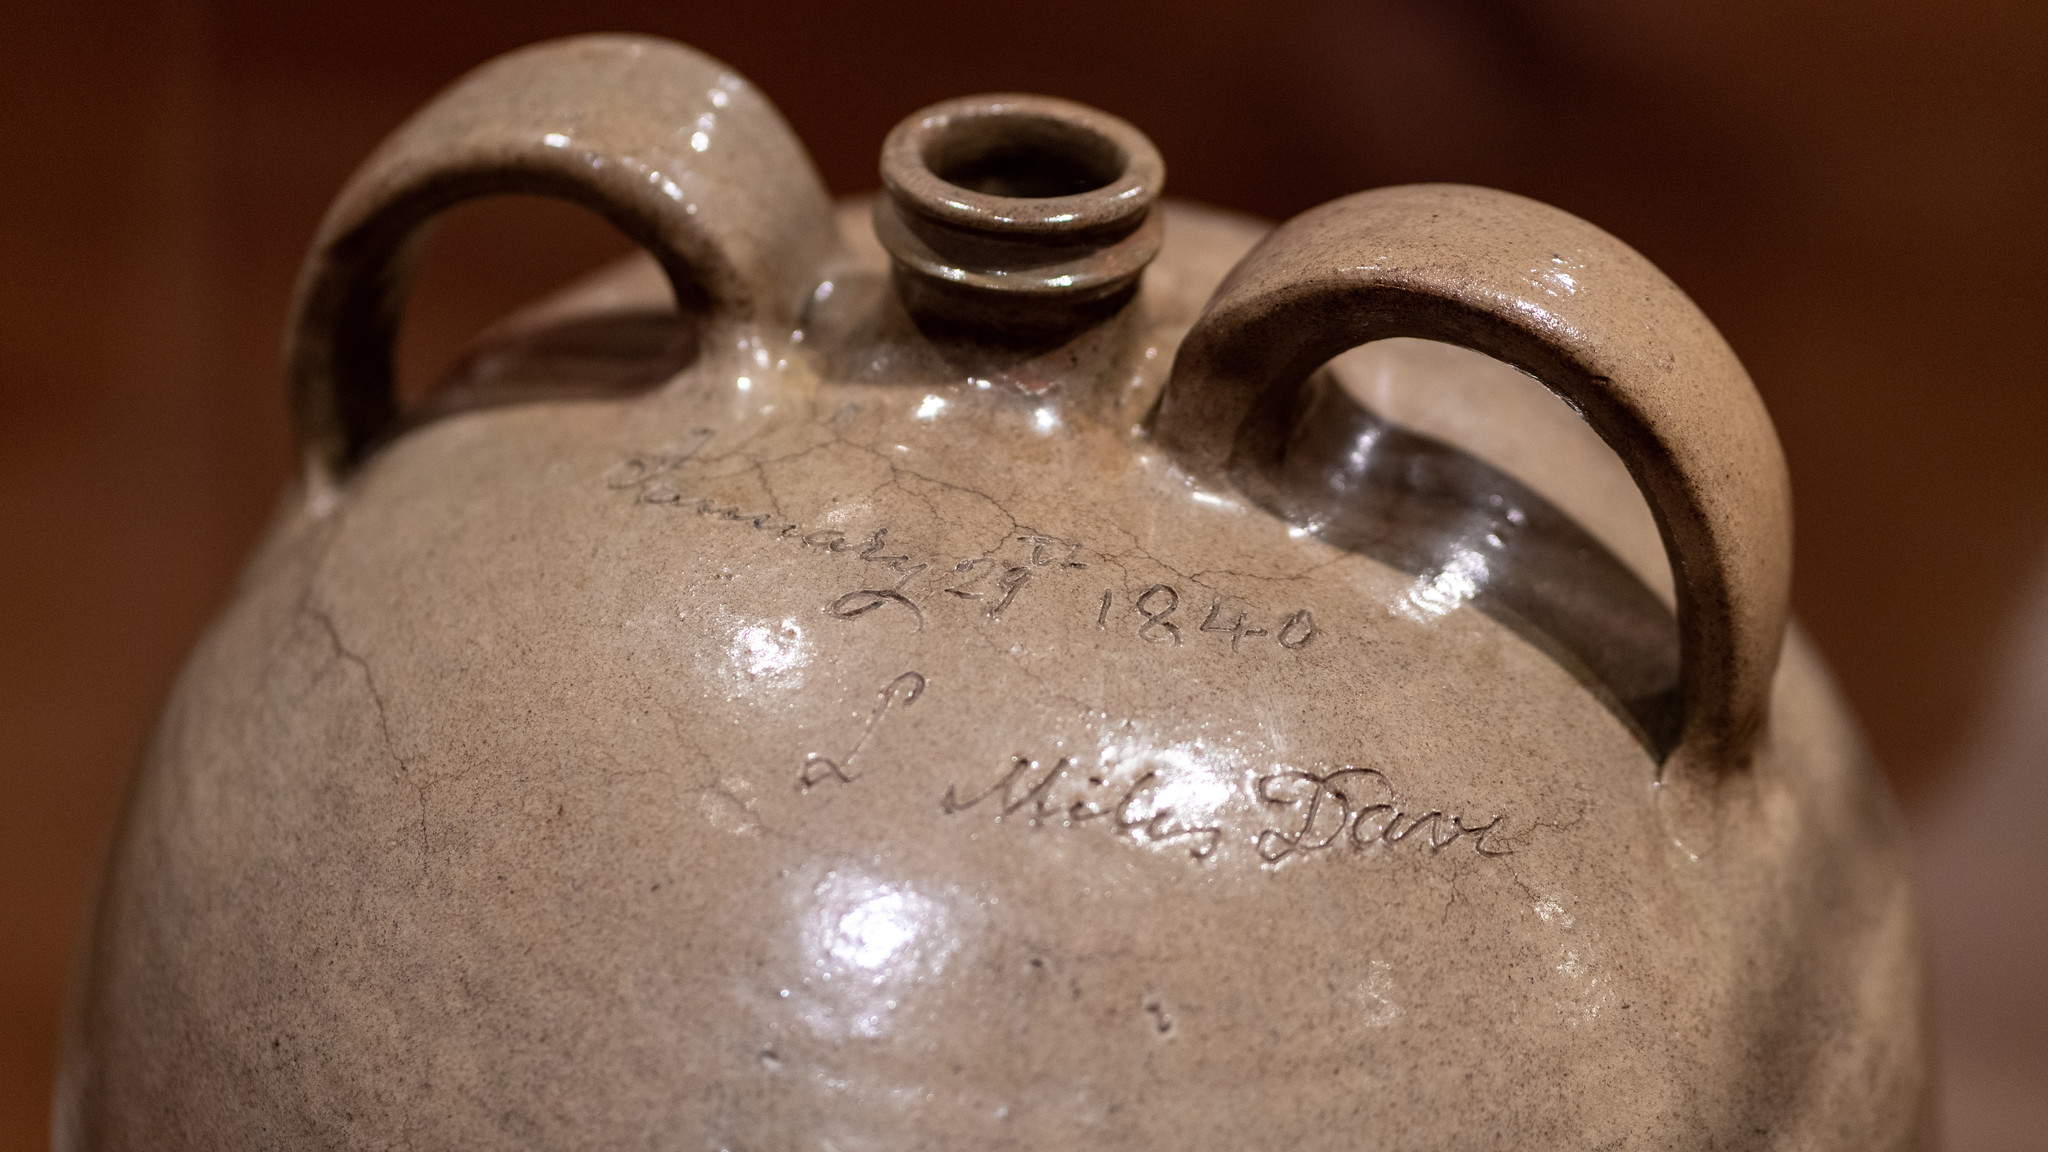 Names and date (detail), David Drake, Doubled-handled Jug (Lewis J. Miles Factory, Horse Creek Valley, Edgefield District, South Carolina), 1840, stoneware with alkaline glaze, 44.13 x 35.24 cm (Virginia Museum of Fine Arts)